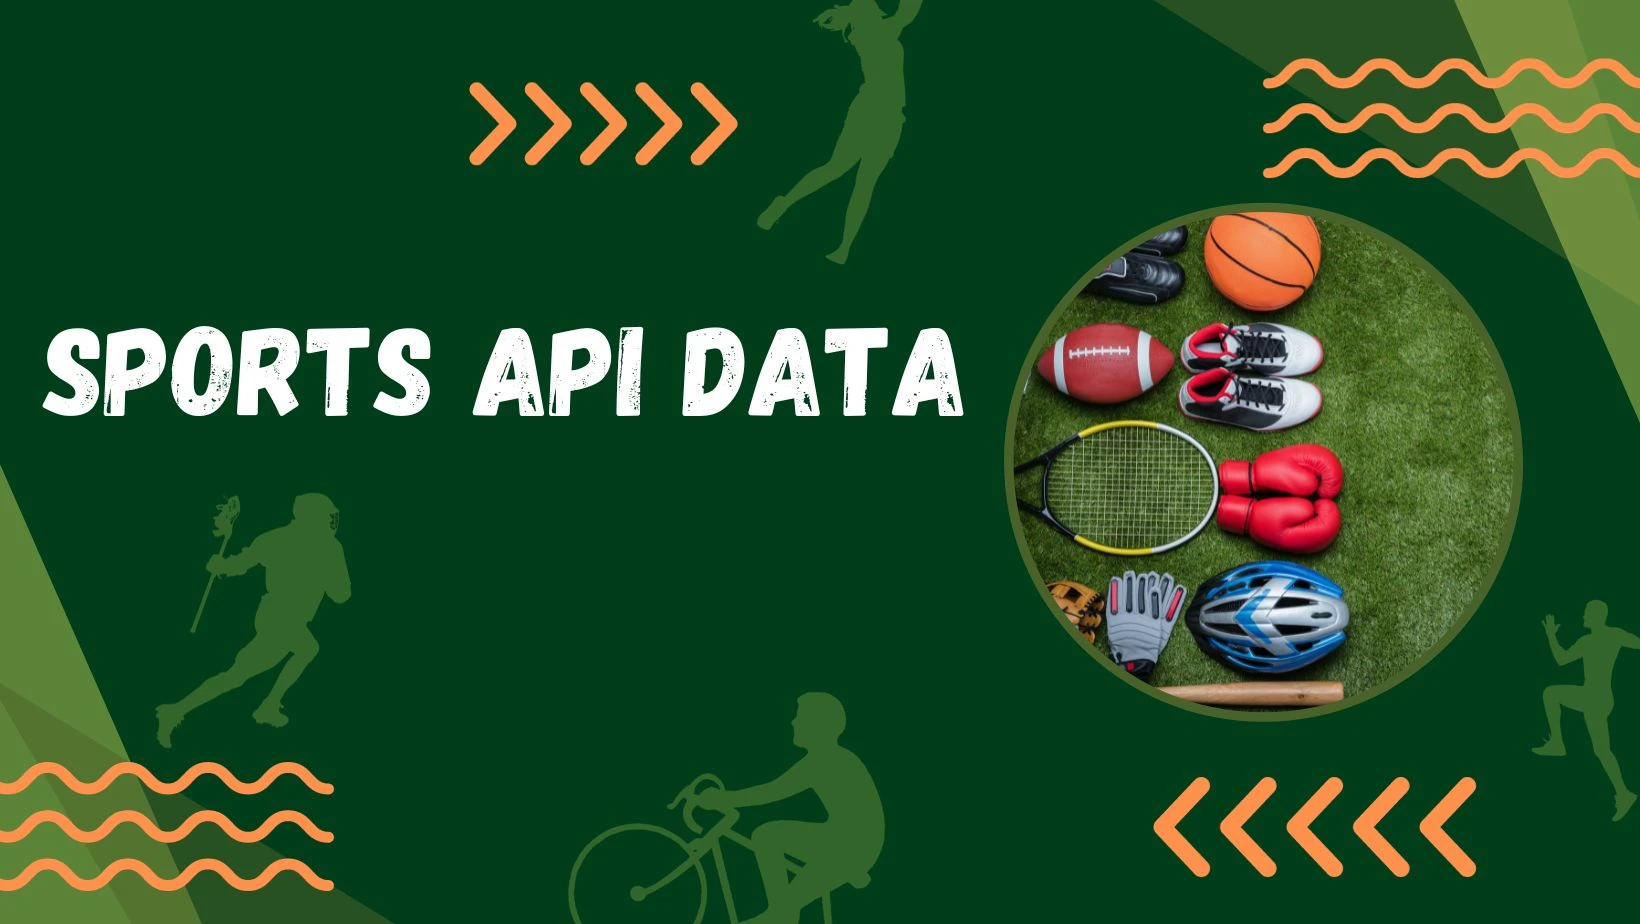 Winning with Sports Data: Building Dynamic Sports Apps with Our Sport API Data